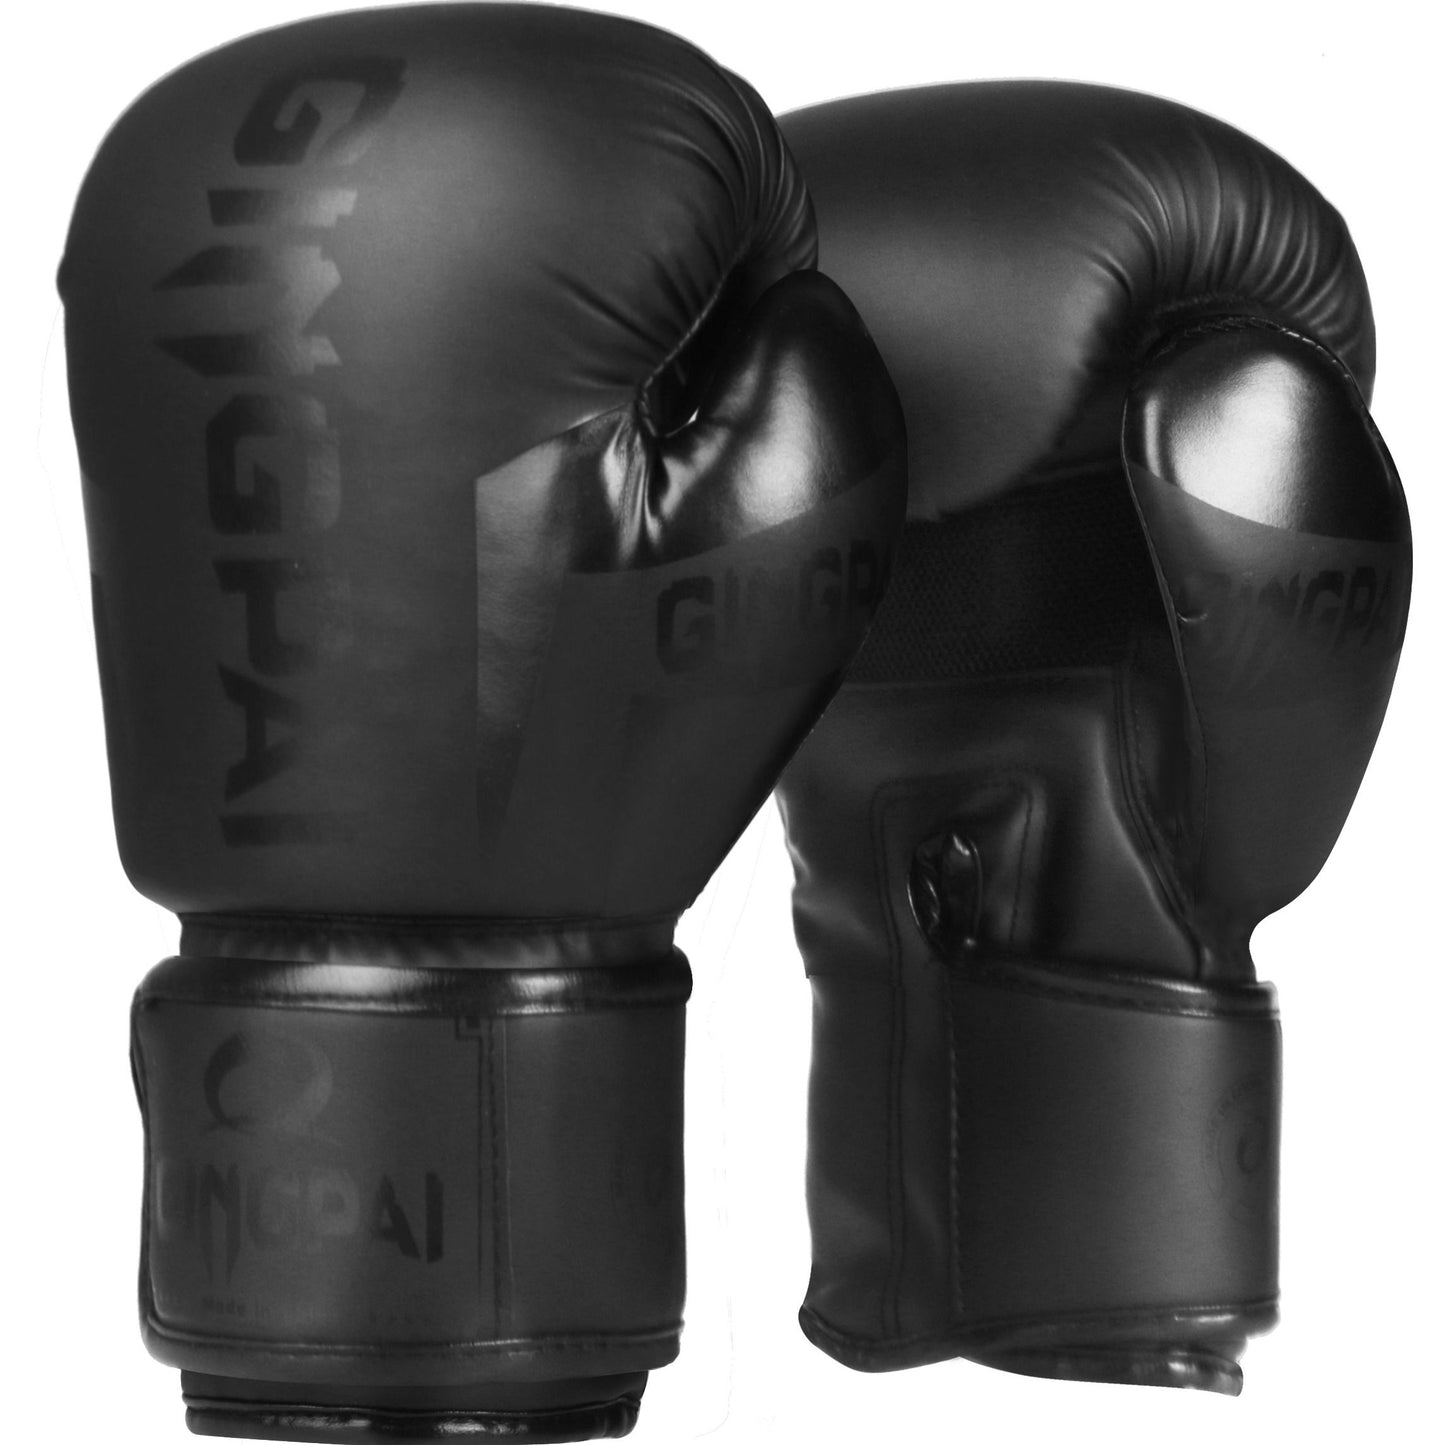 Professional Boxing Gloves for a Strong and Precise Punch